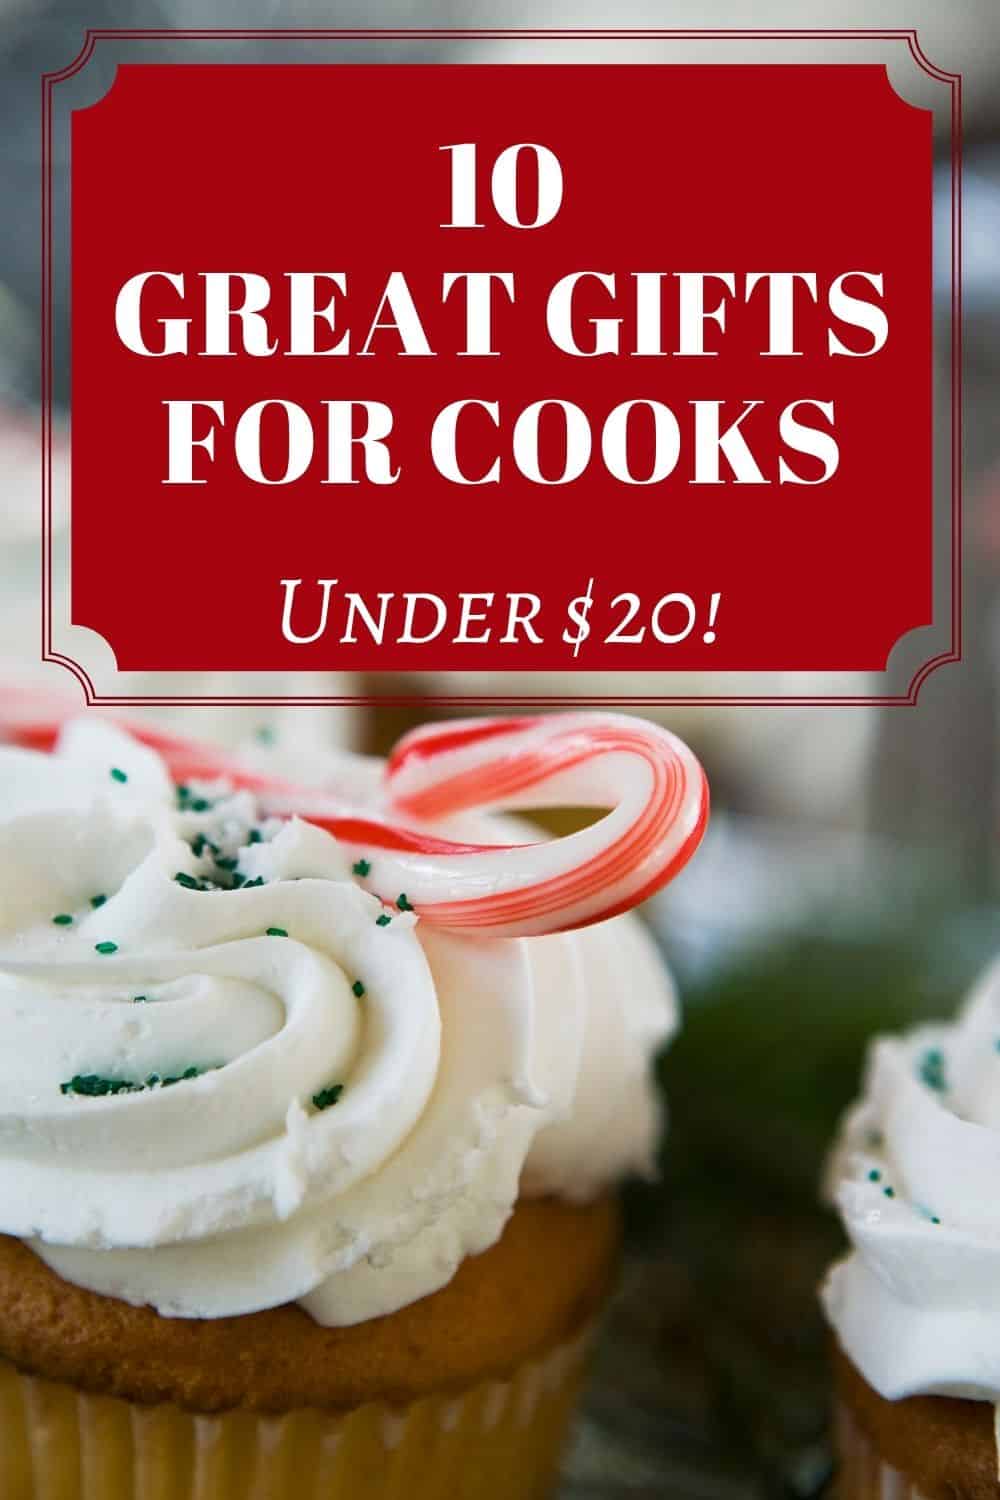 10 Great Gifts for Cooks - Under $20!